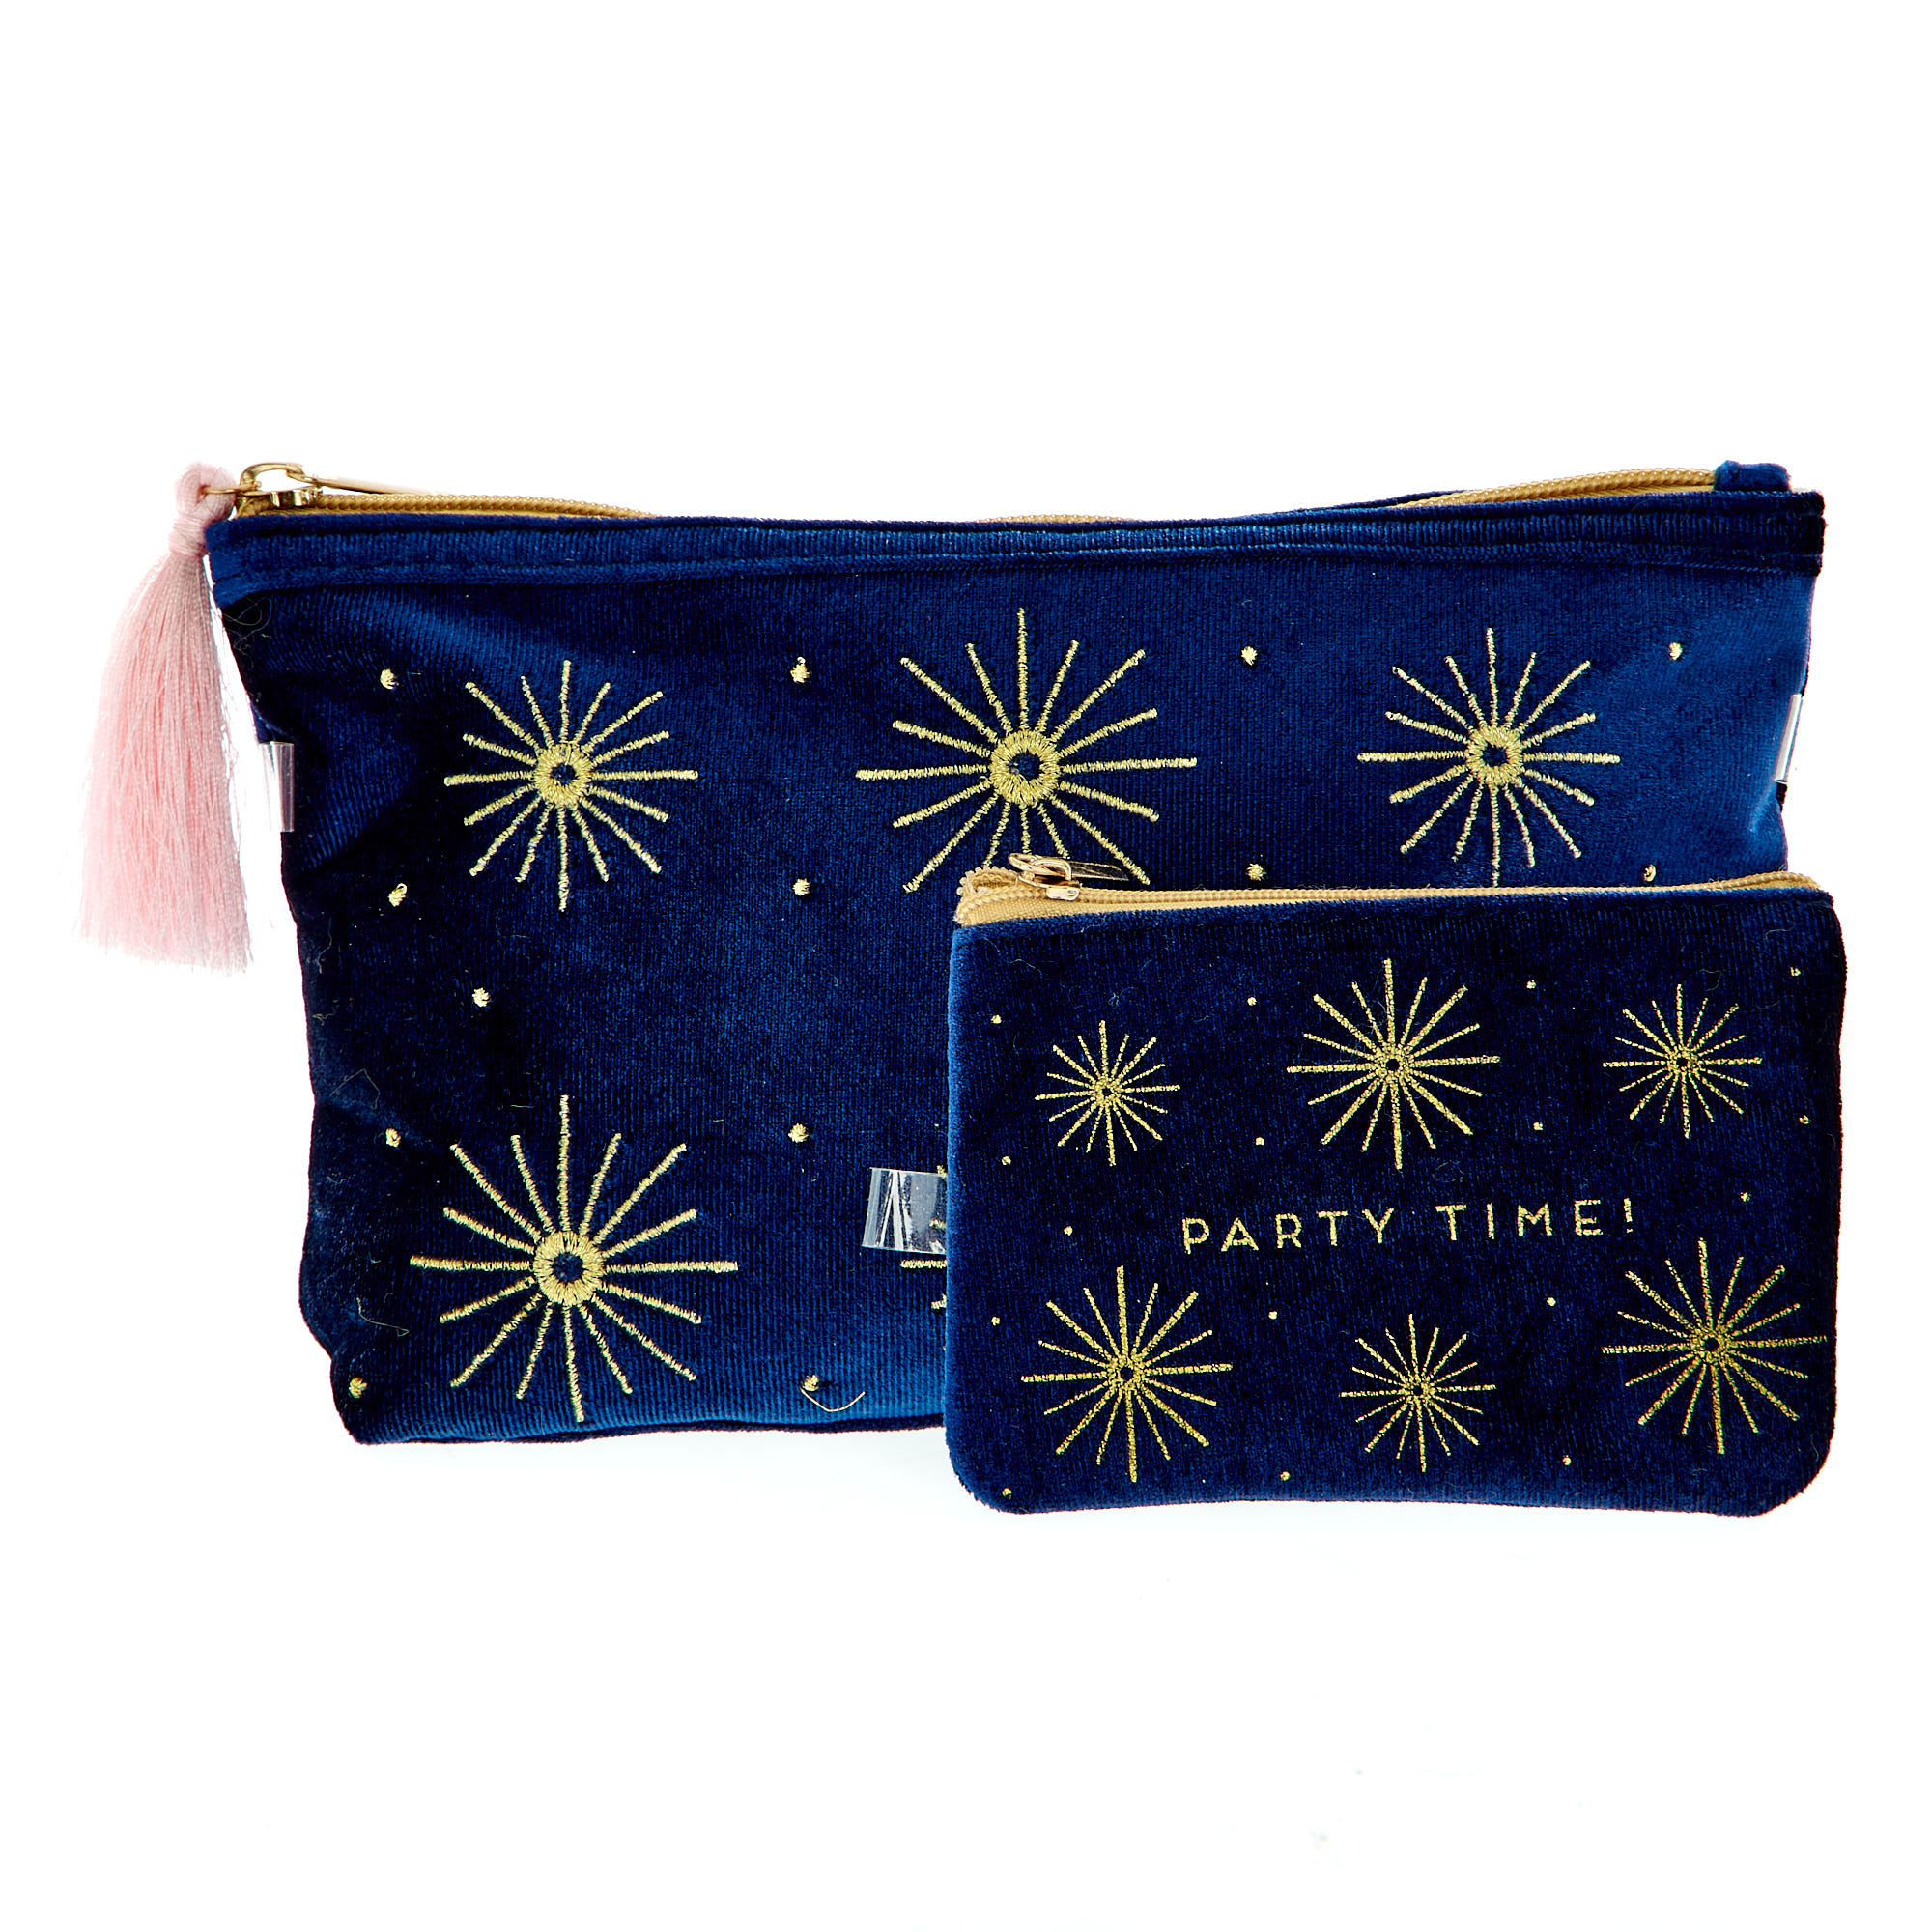 Party Time Make Up Bag & Coin Purse